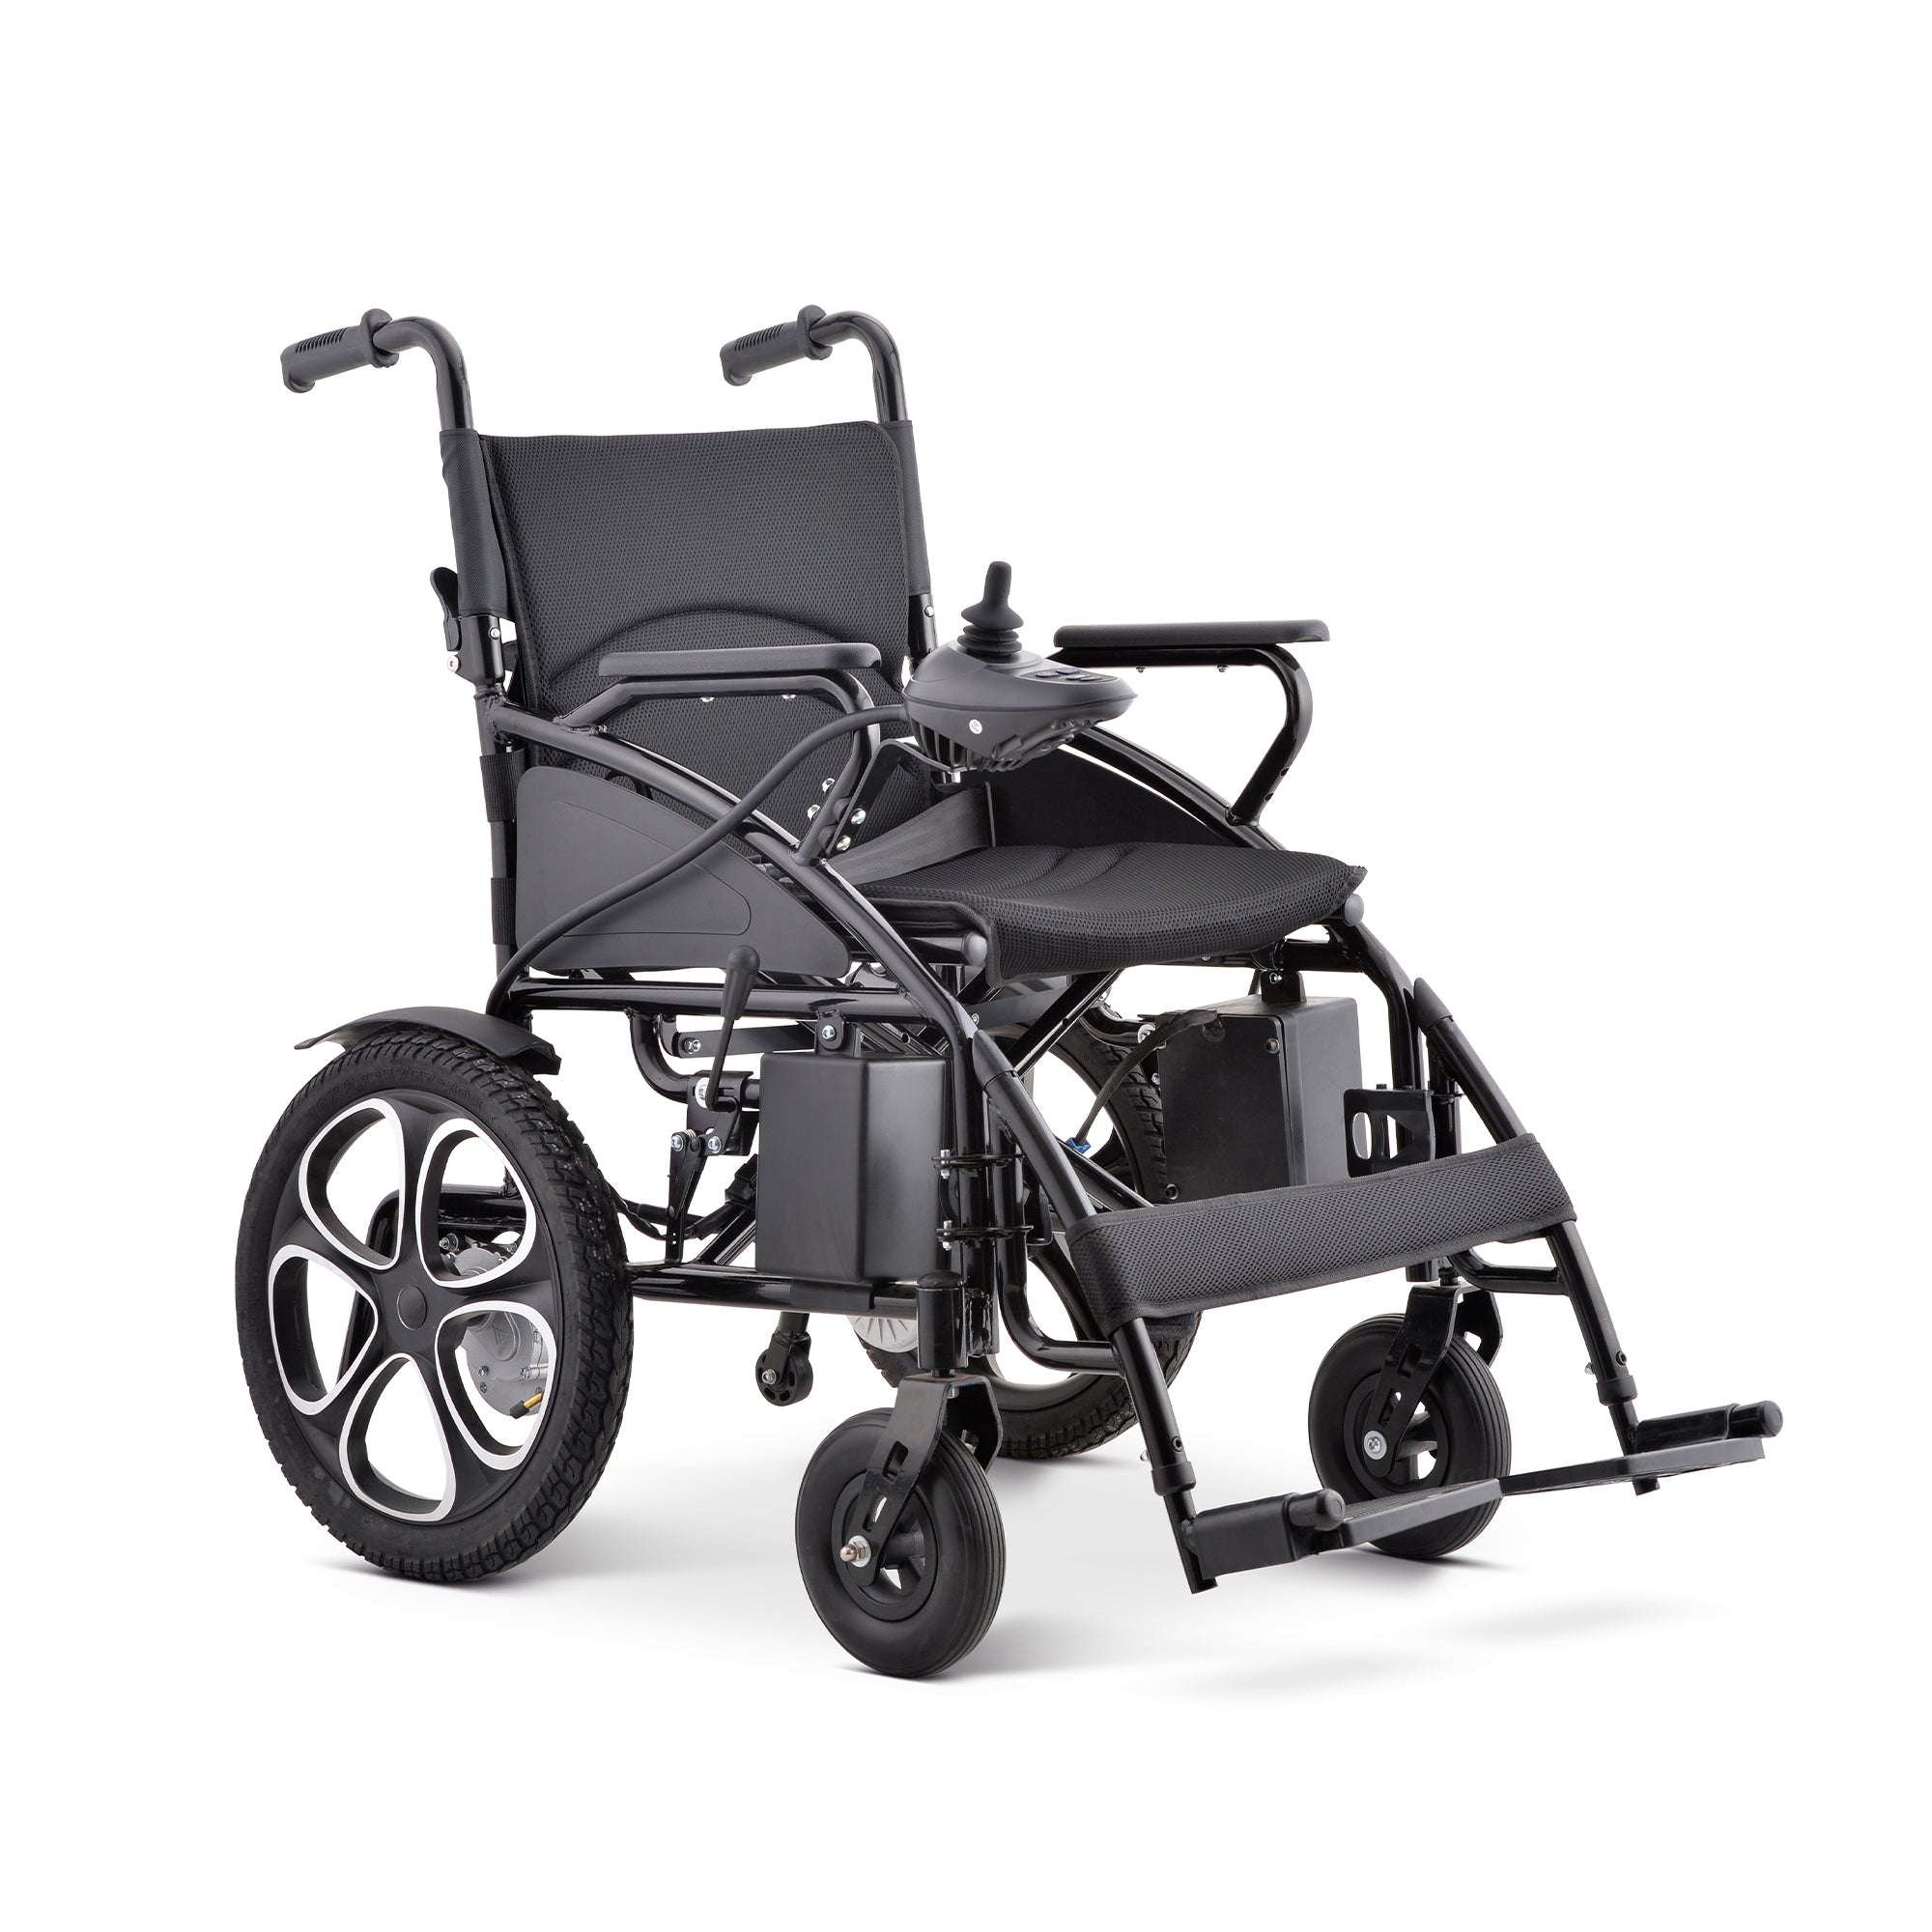 Rubicon DX01 - Affordable All Terrain Powerful Motorized Electric  Wheelchair for Adults: Lightweight, Portable for Travel | Low Price Power  Wheelchair